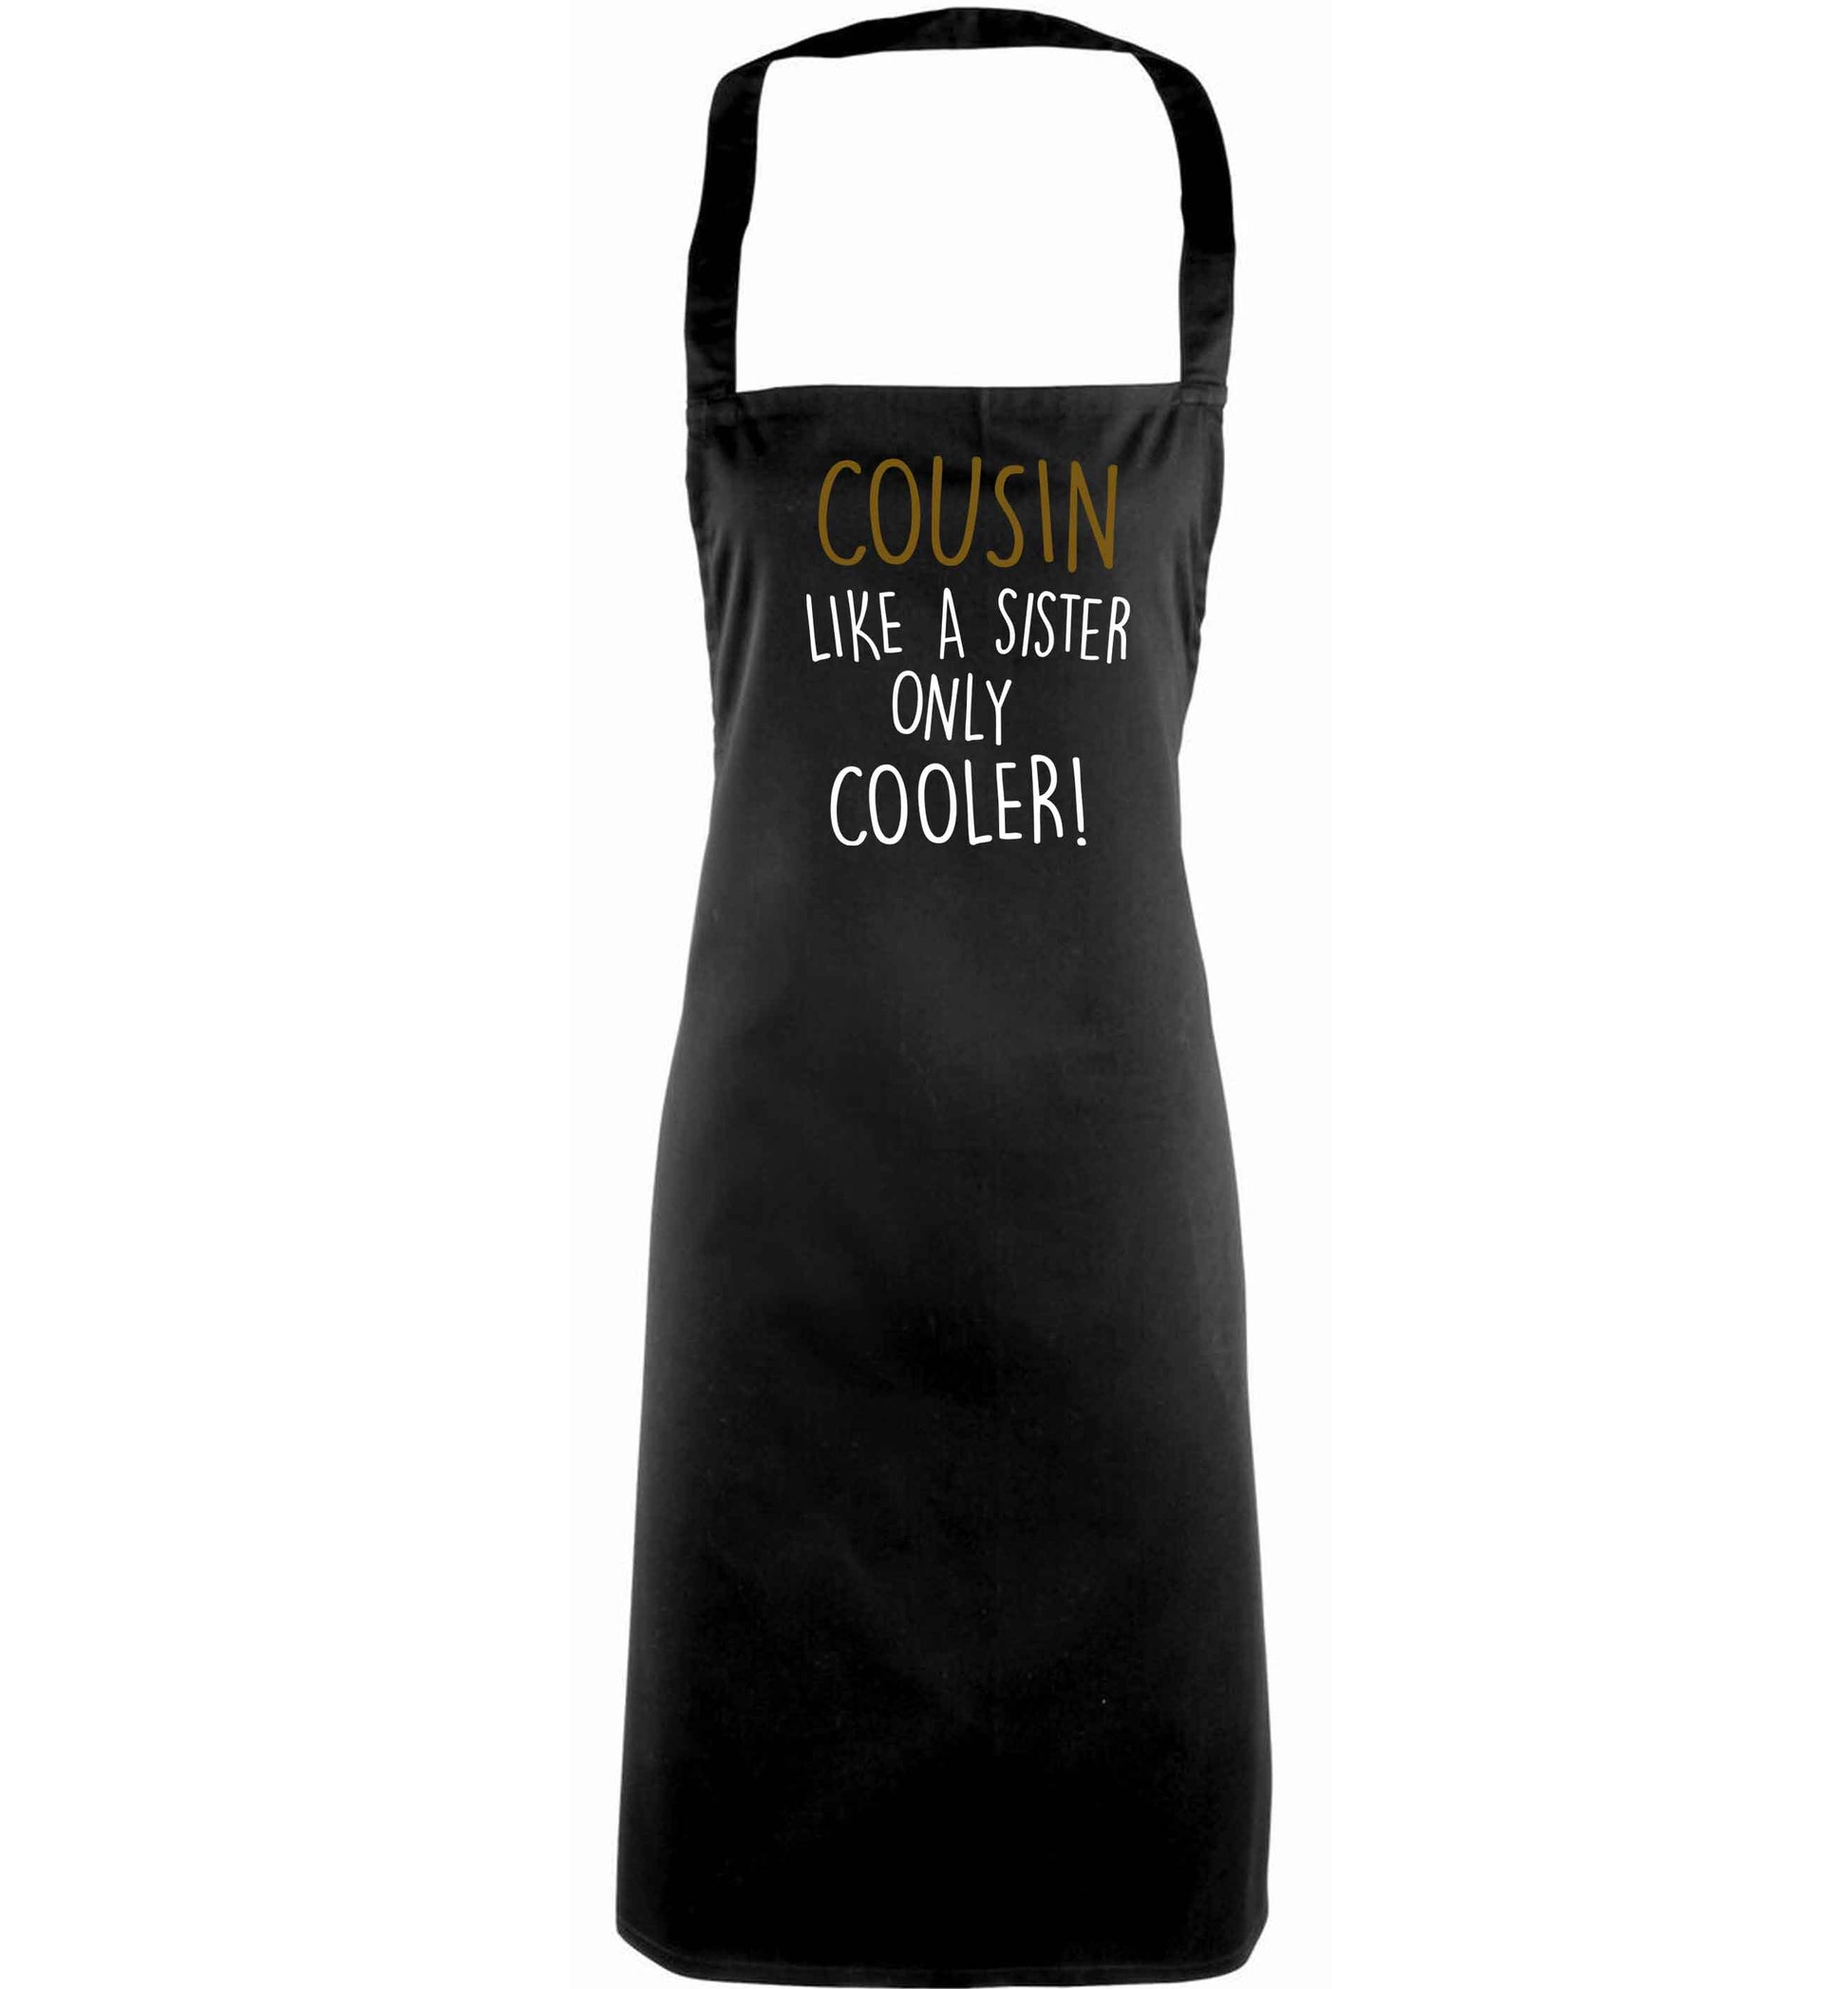 Cousin like a sister only cooler adults black apron